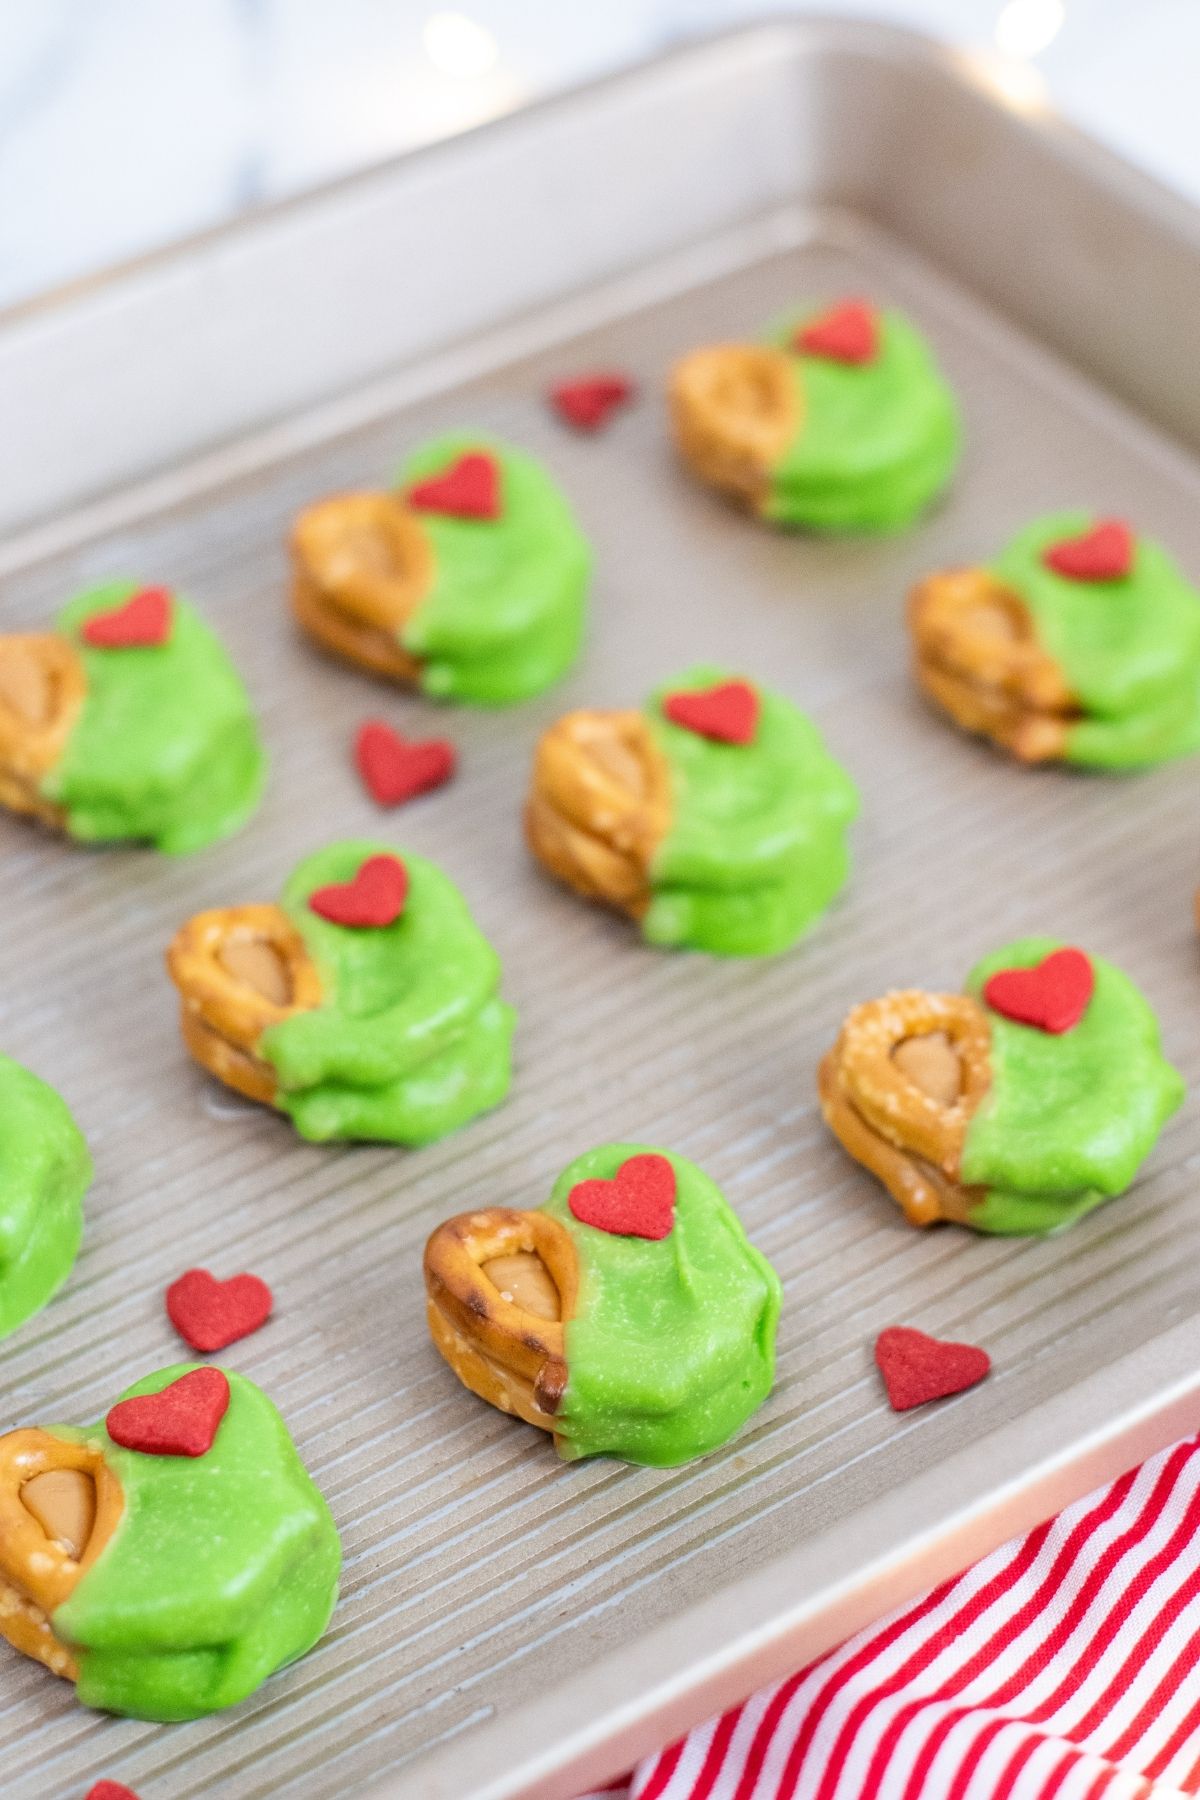 bright green coated pretzels with a large red heart lined on a baking tray